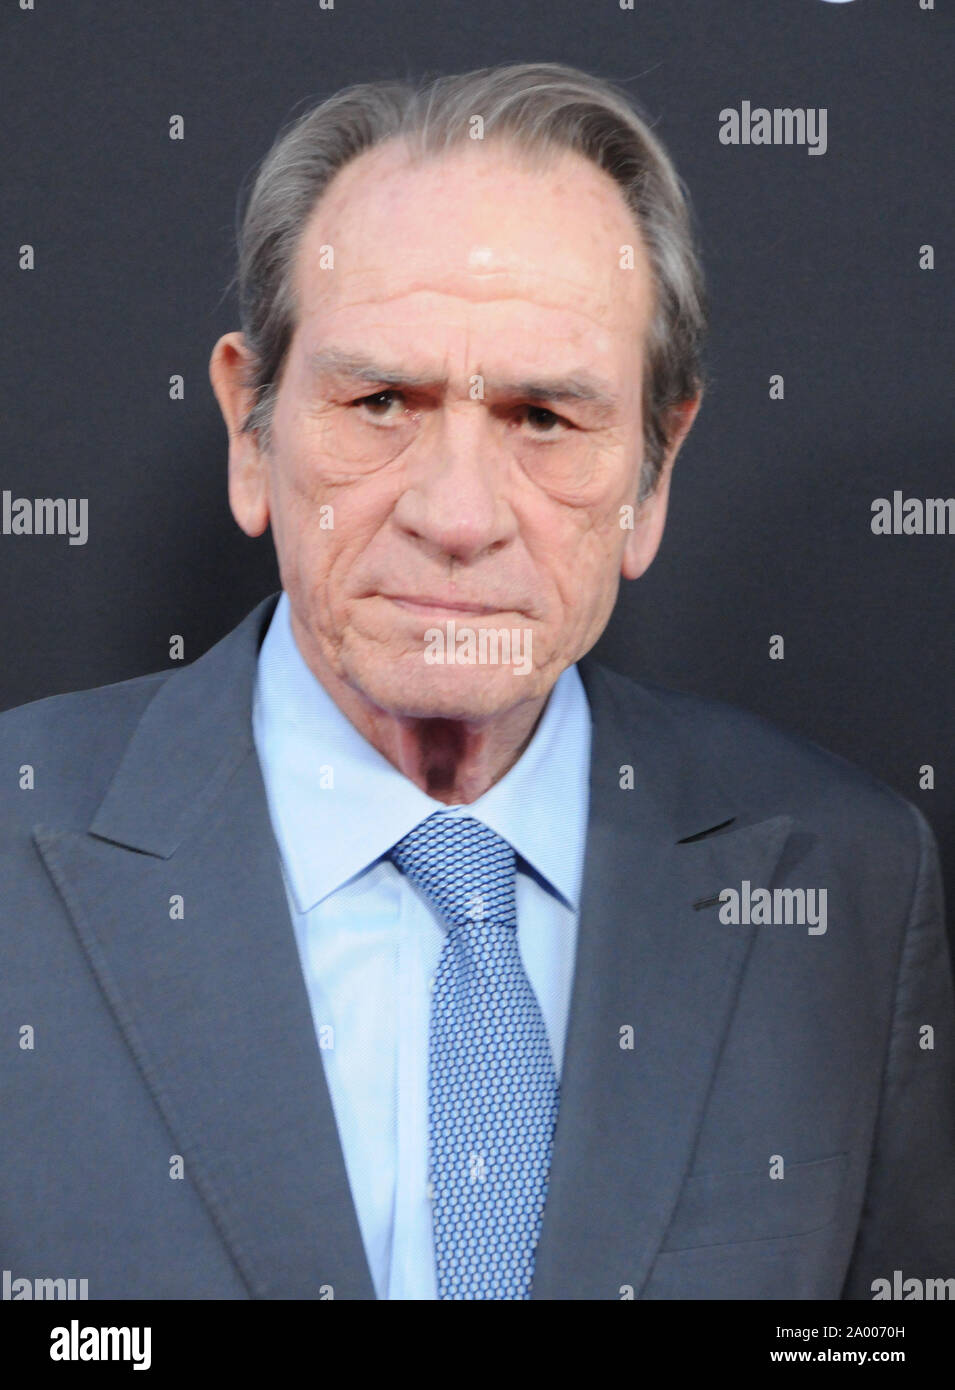 Hollywood, California, USA 18th September 2018 Actor Tommy Lee Jones attends 20th Century Fox's 'Ad Astra' Special Screening on September 18, 2018 at Cinerama Dome in Hollywood, California, USA. Photo by Barry King/Alamy Live News Stock Photo